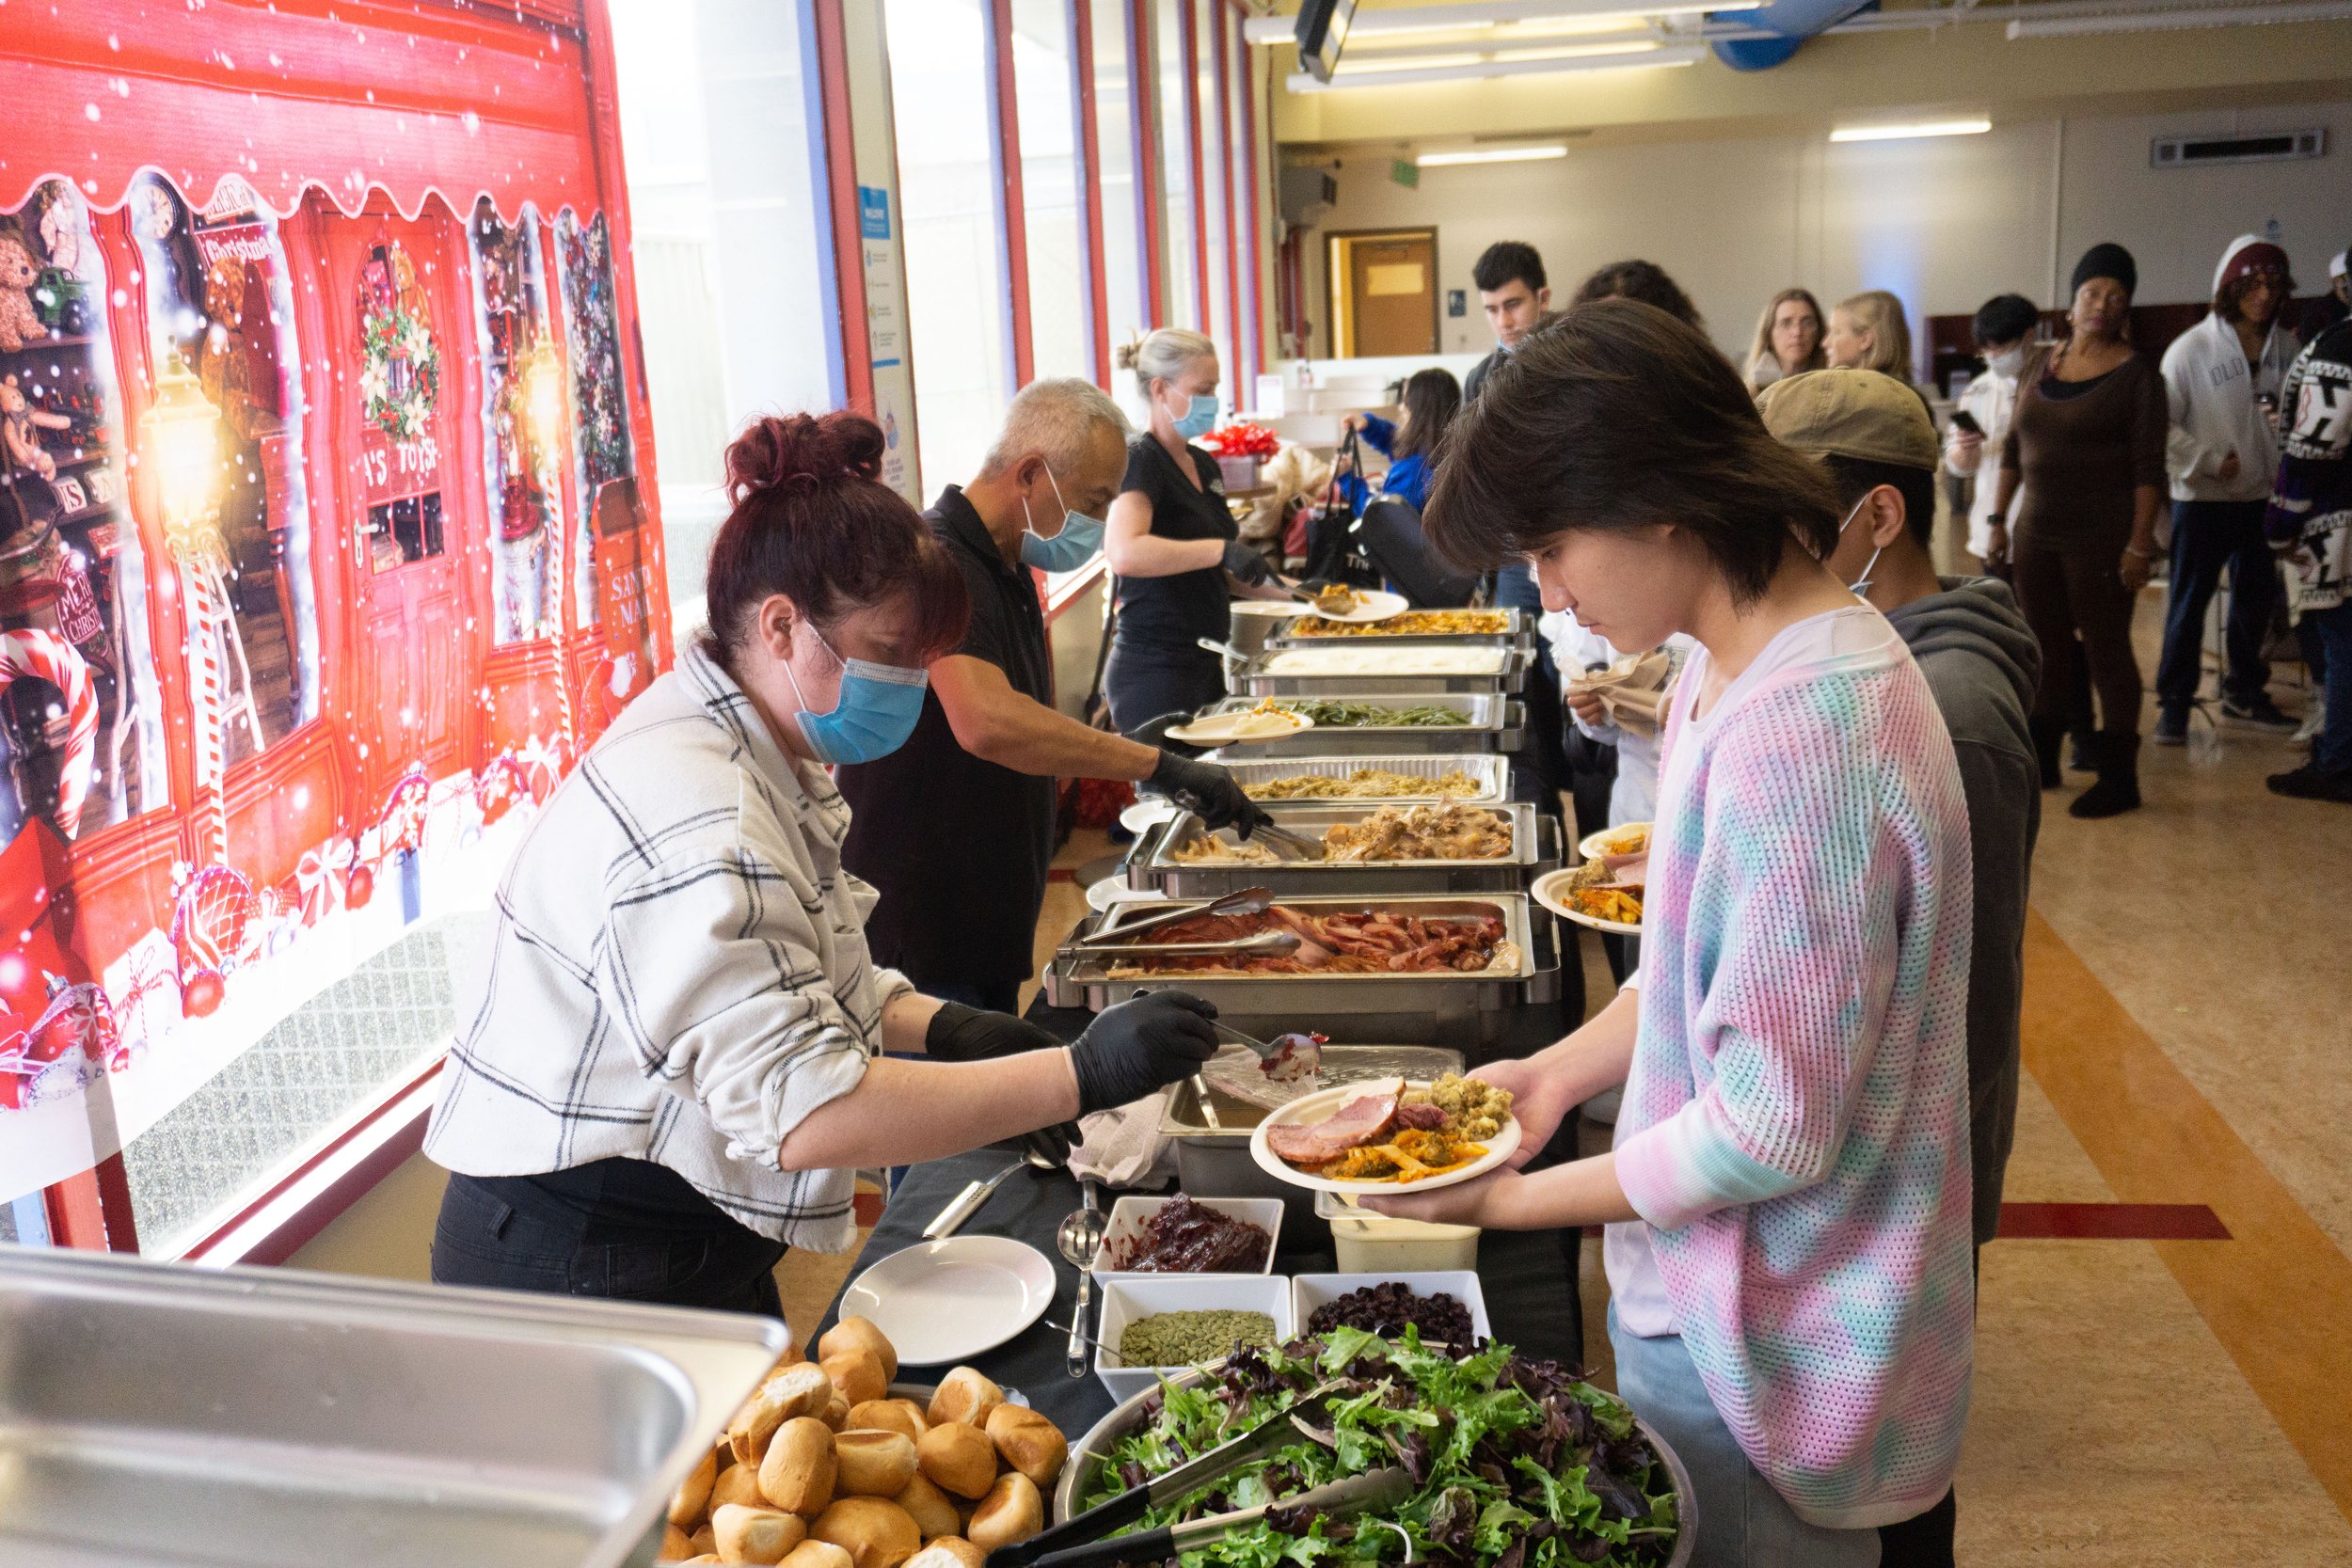  Nursing student Kevin Wei 20, at the Associated Students sponsored event geting a hot meal at the "Corsair Family Holiday Event" at Santa Monica College main campus in the Cayton Center and Cafeteria on Tuseday, December 6, 2022, in Santa Monica, Ca